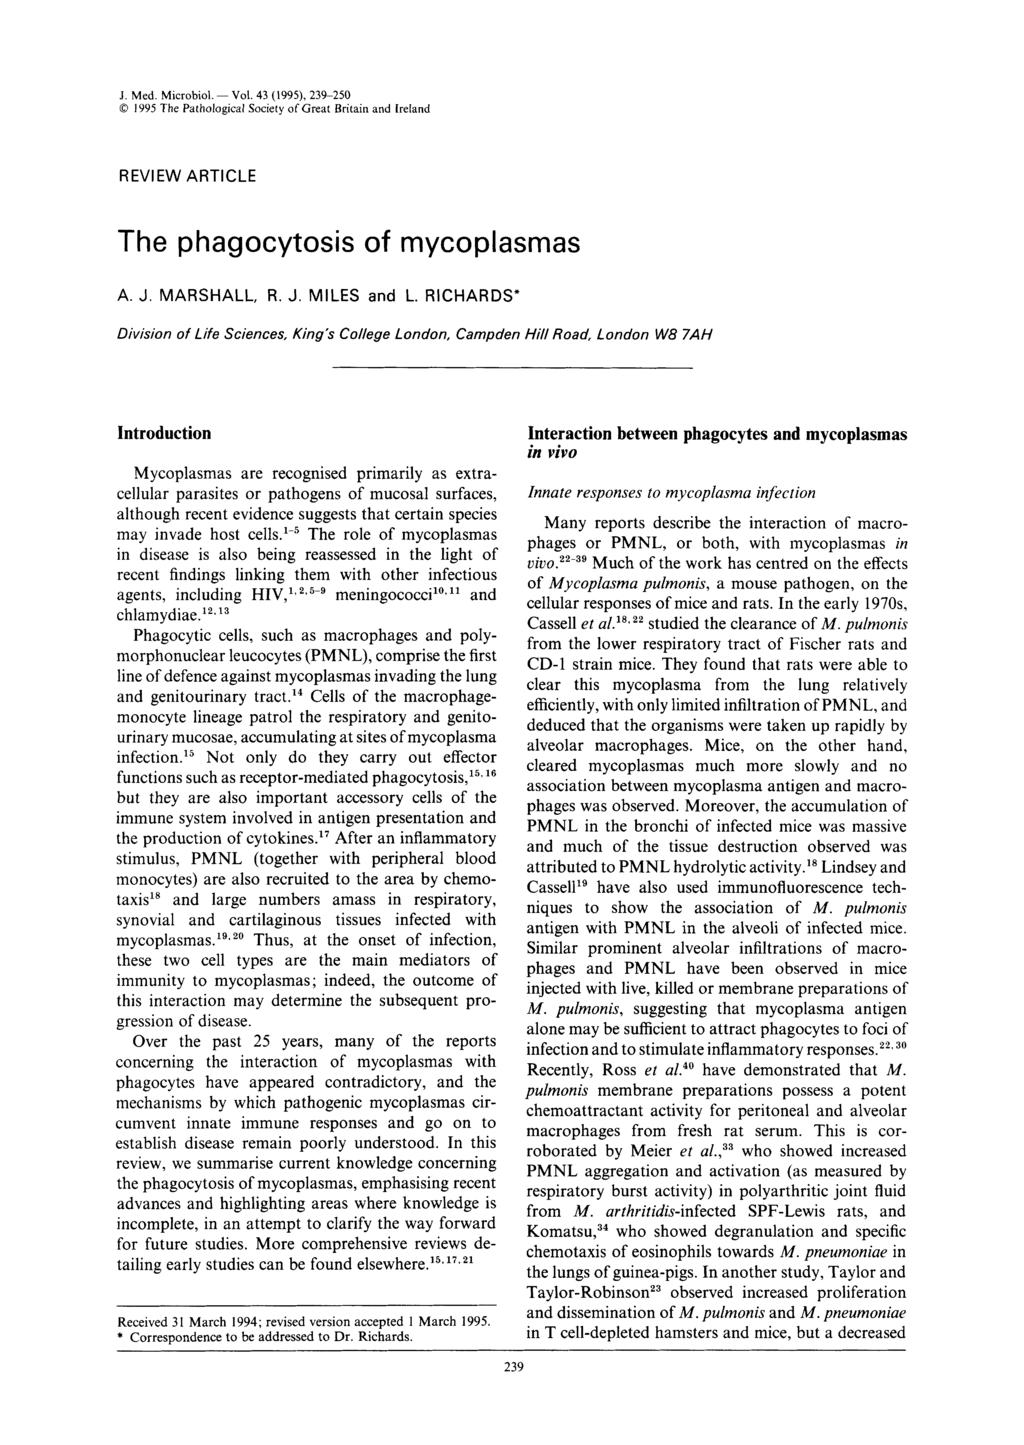 J. Med. Microbiol. - Vol. 43 (1995), 239-250 0 I995 The Pathological Society of Great Britain and Ireland REVIEW ARTICLE The phagocytosis of mycoplasmas A. J. MARSHALL, R. J. MILES and L.